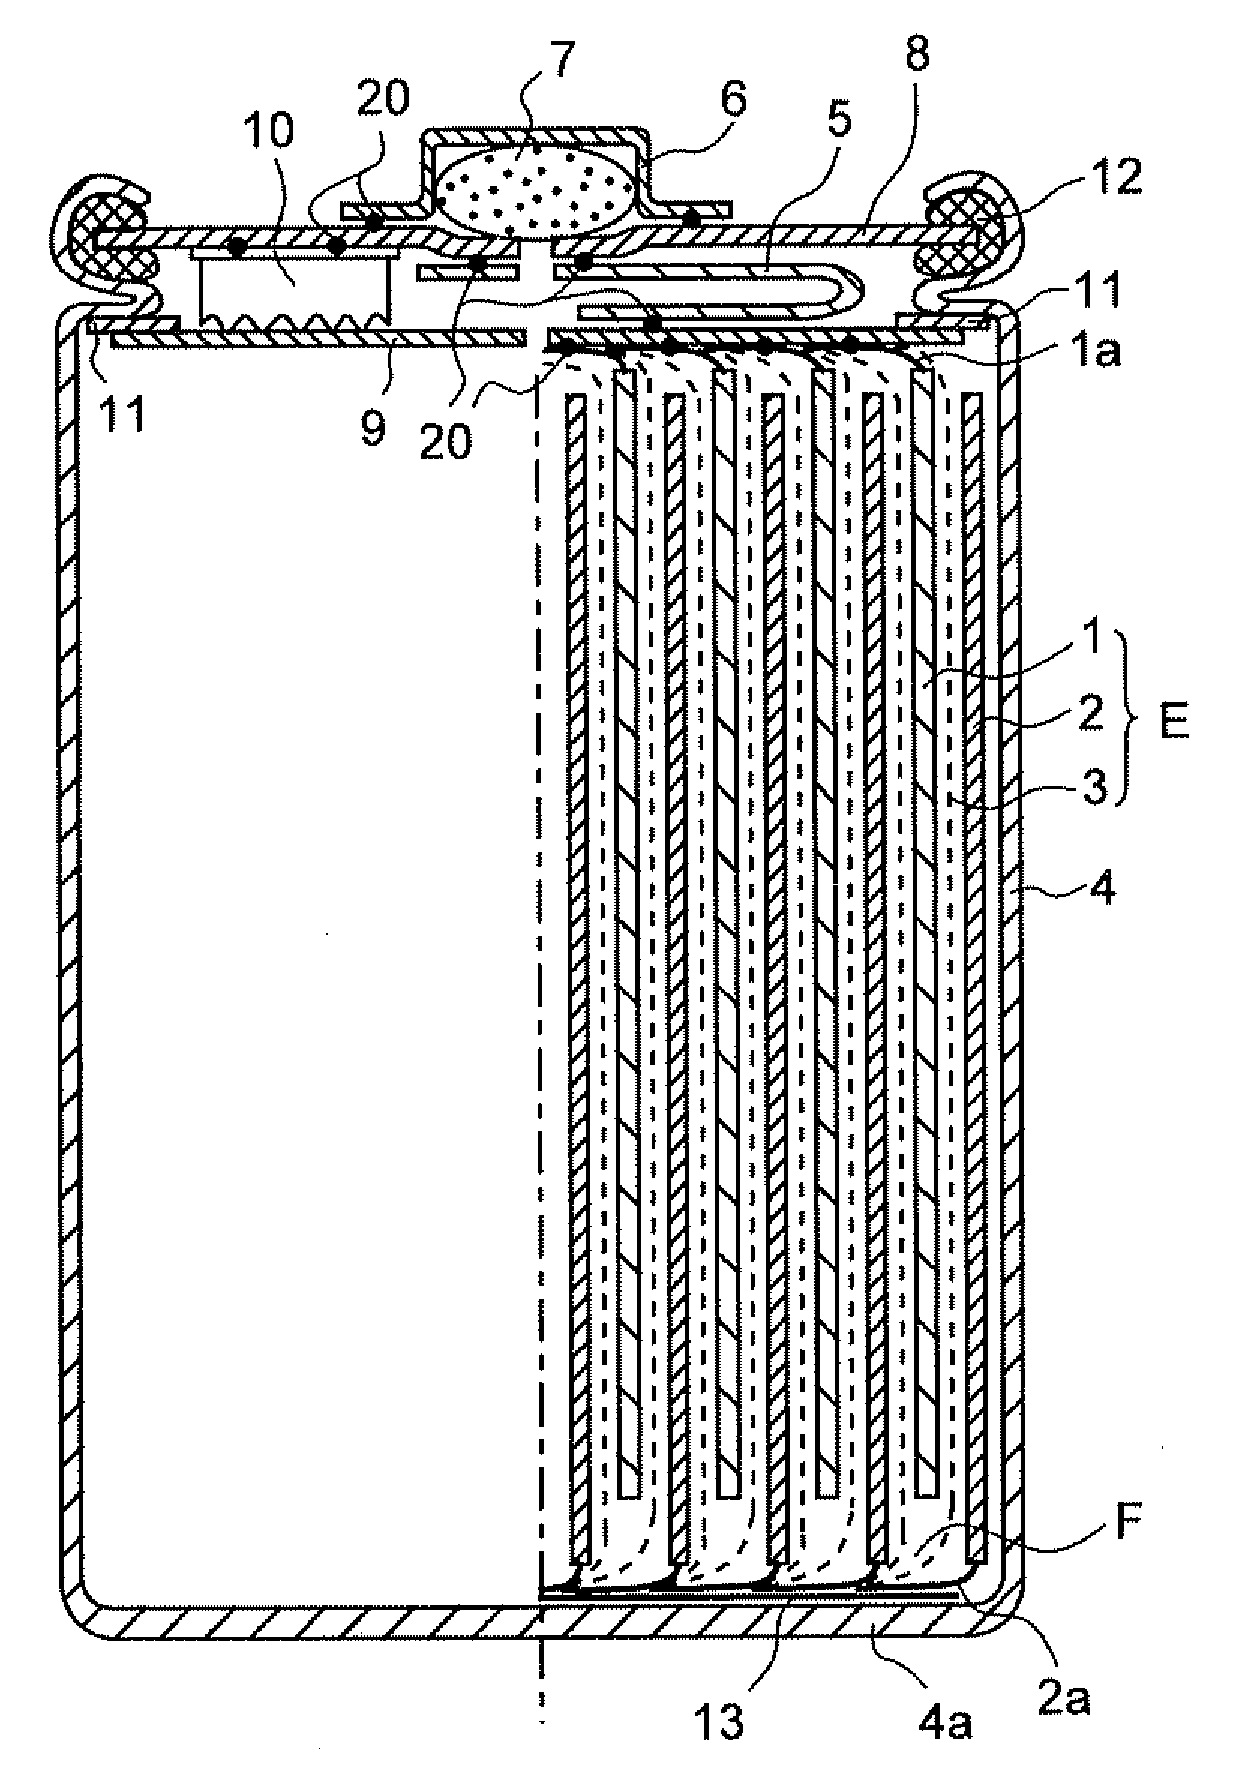 Secondary Battery with a Spirally-Rolled Electrode Group